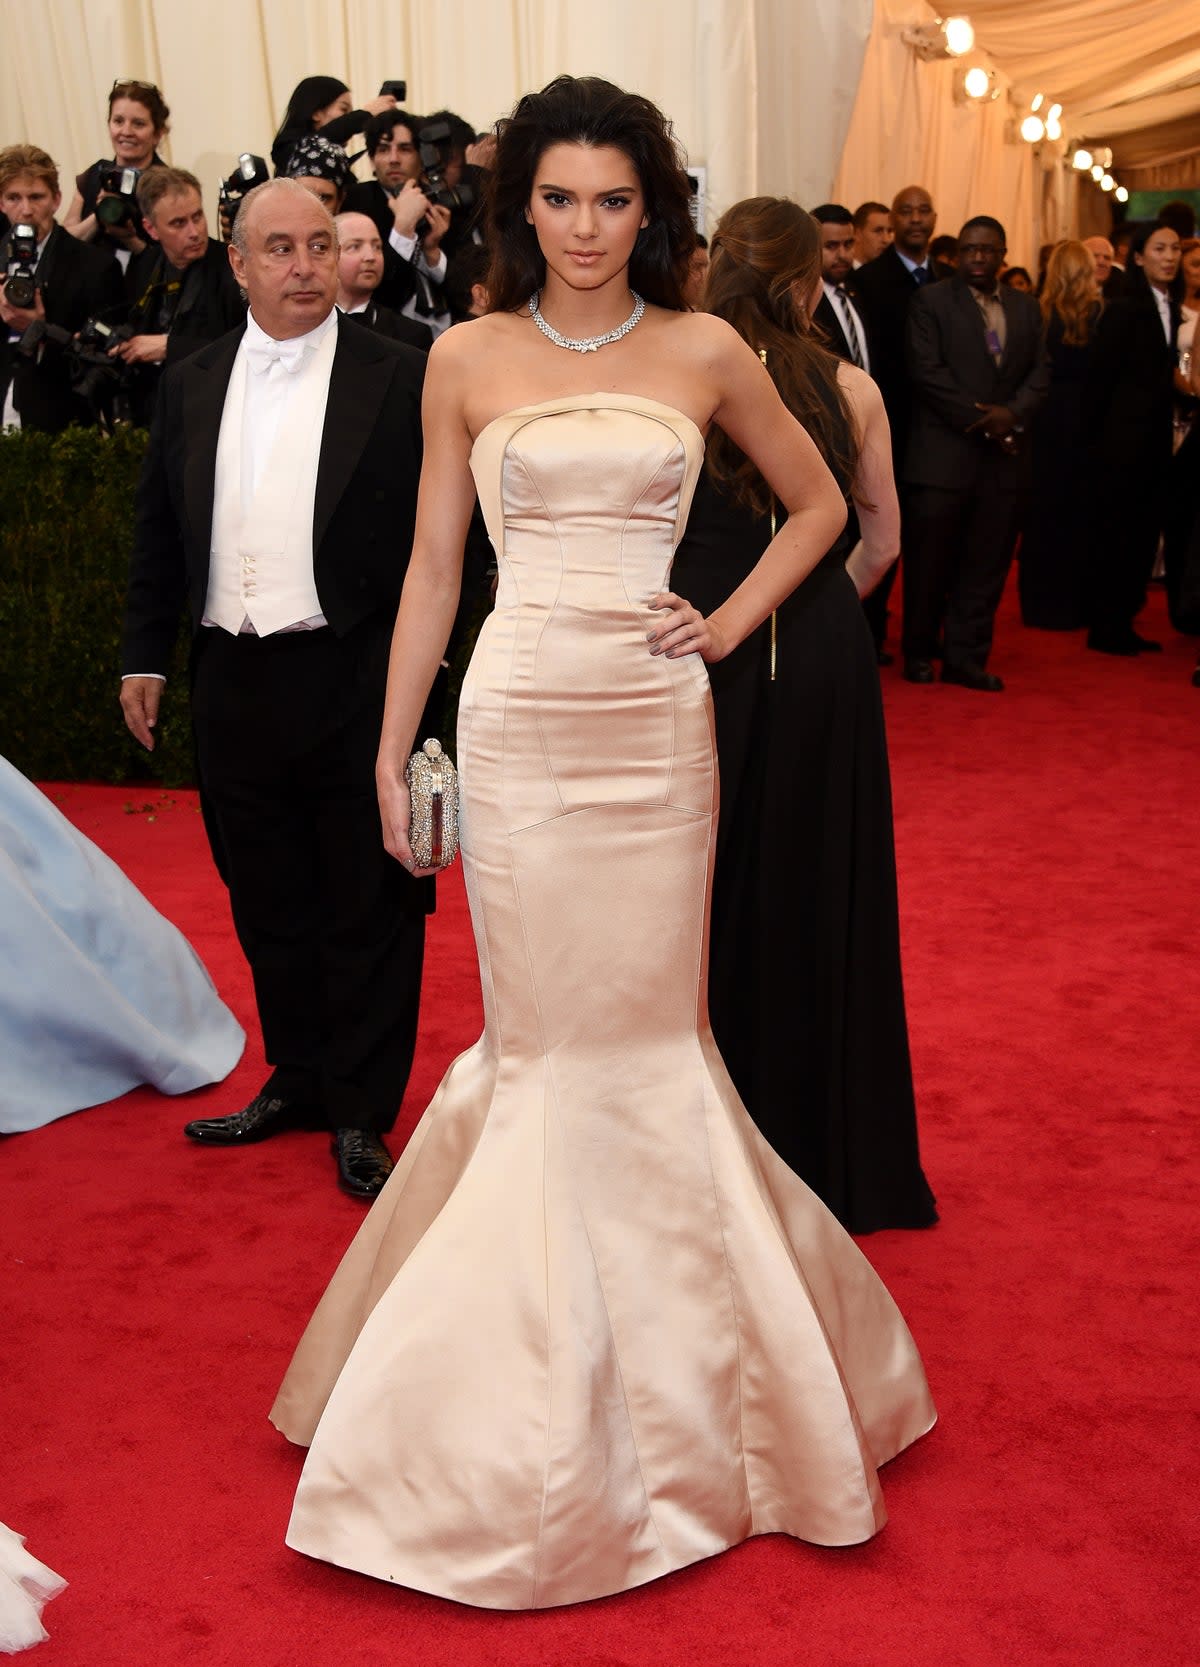 Kendall Jenner at the 2014 Met Gala (Getty Images)